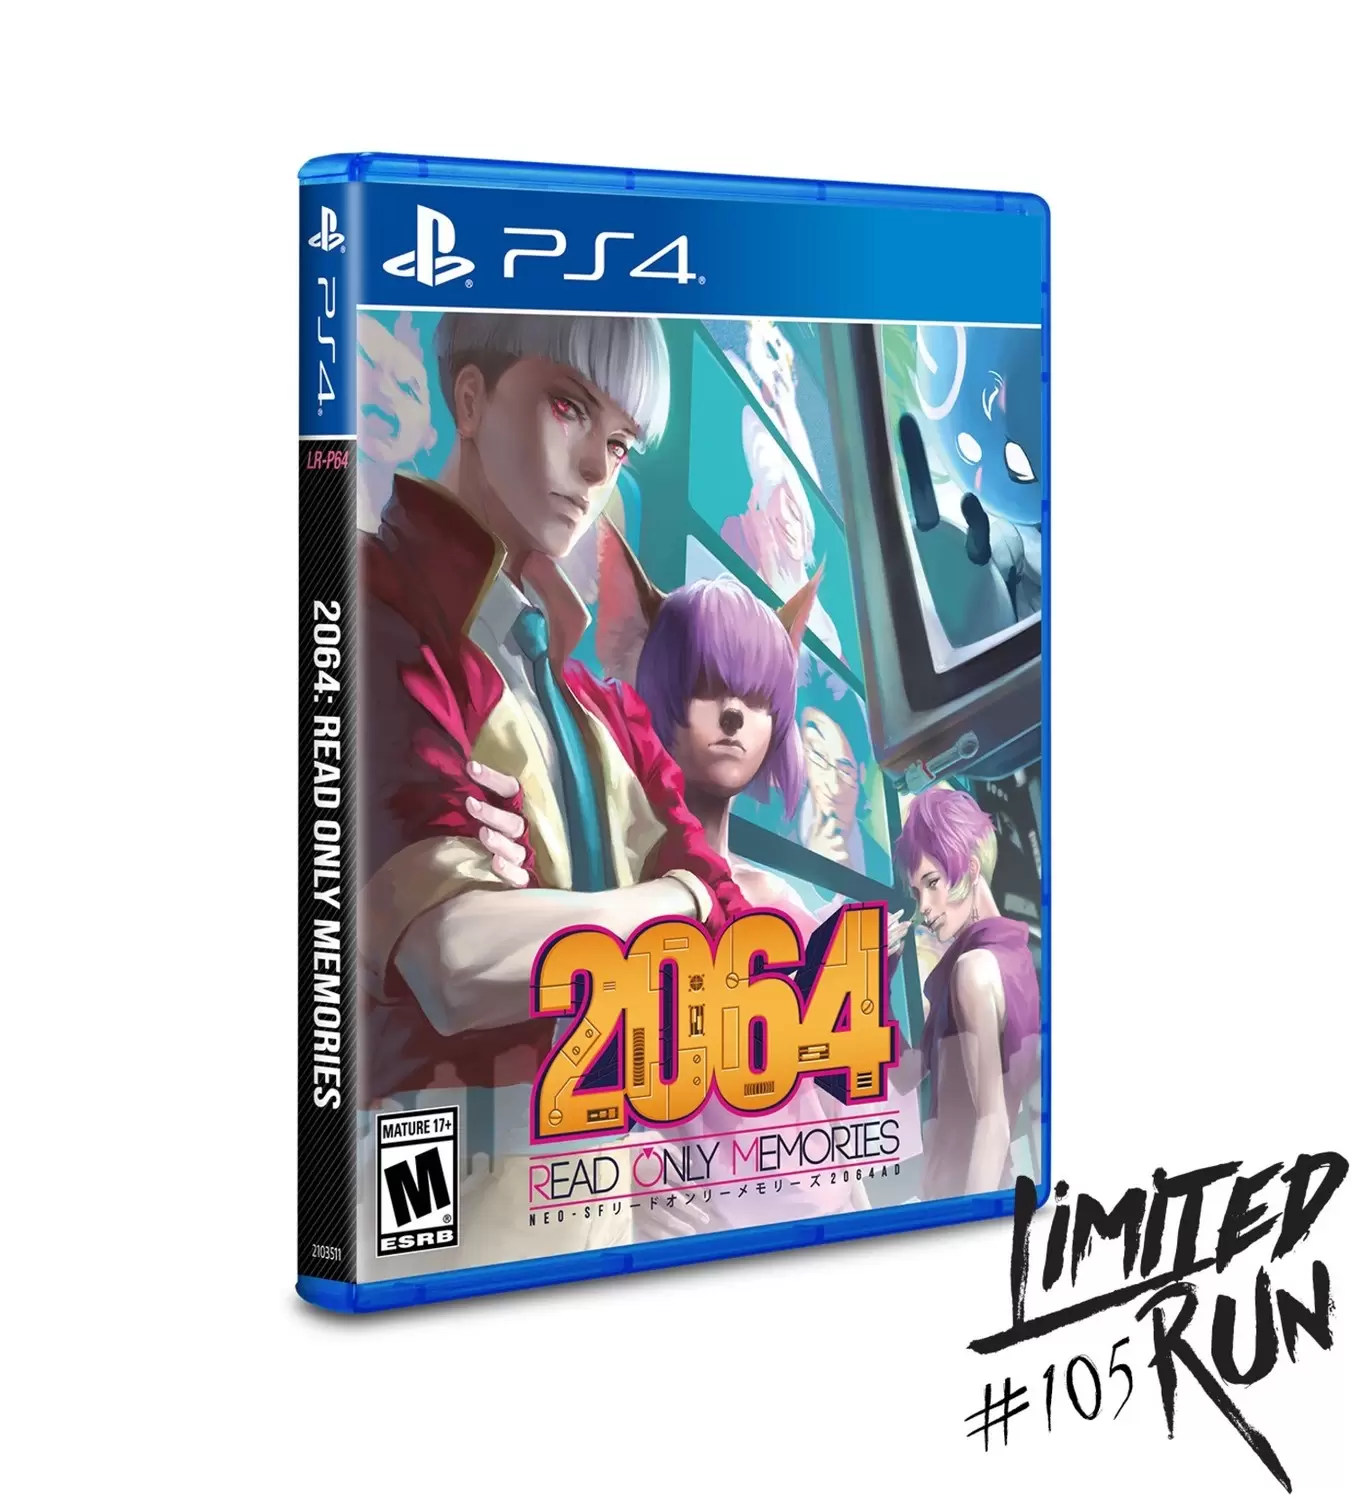 PS4 Games - 2064: Read Only Memories